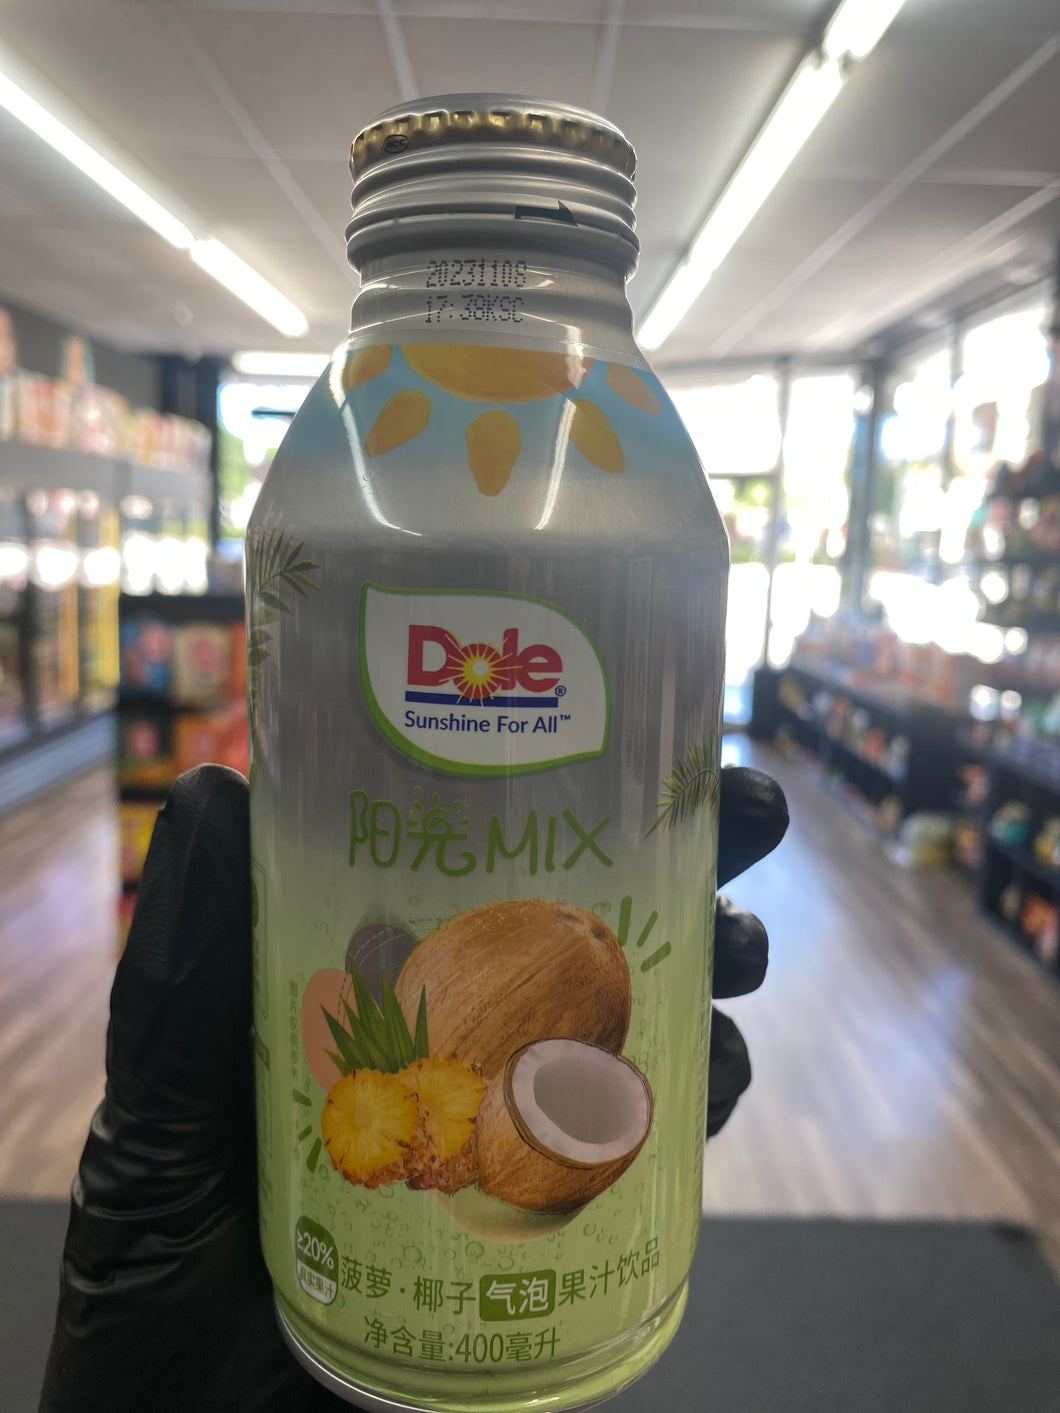 Dole Mix Pineapple & Coconut Sparkling Juice Drink (China)